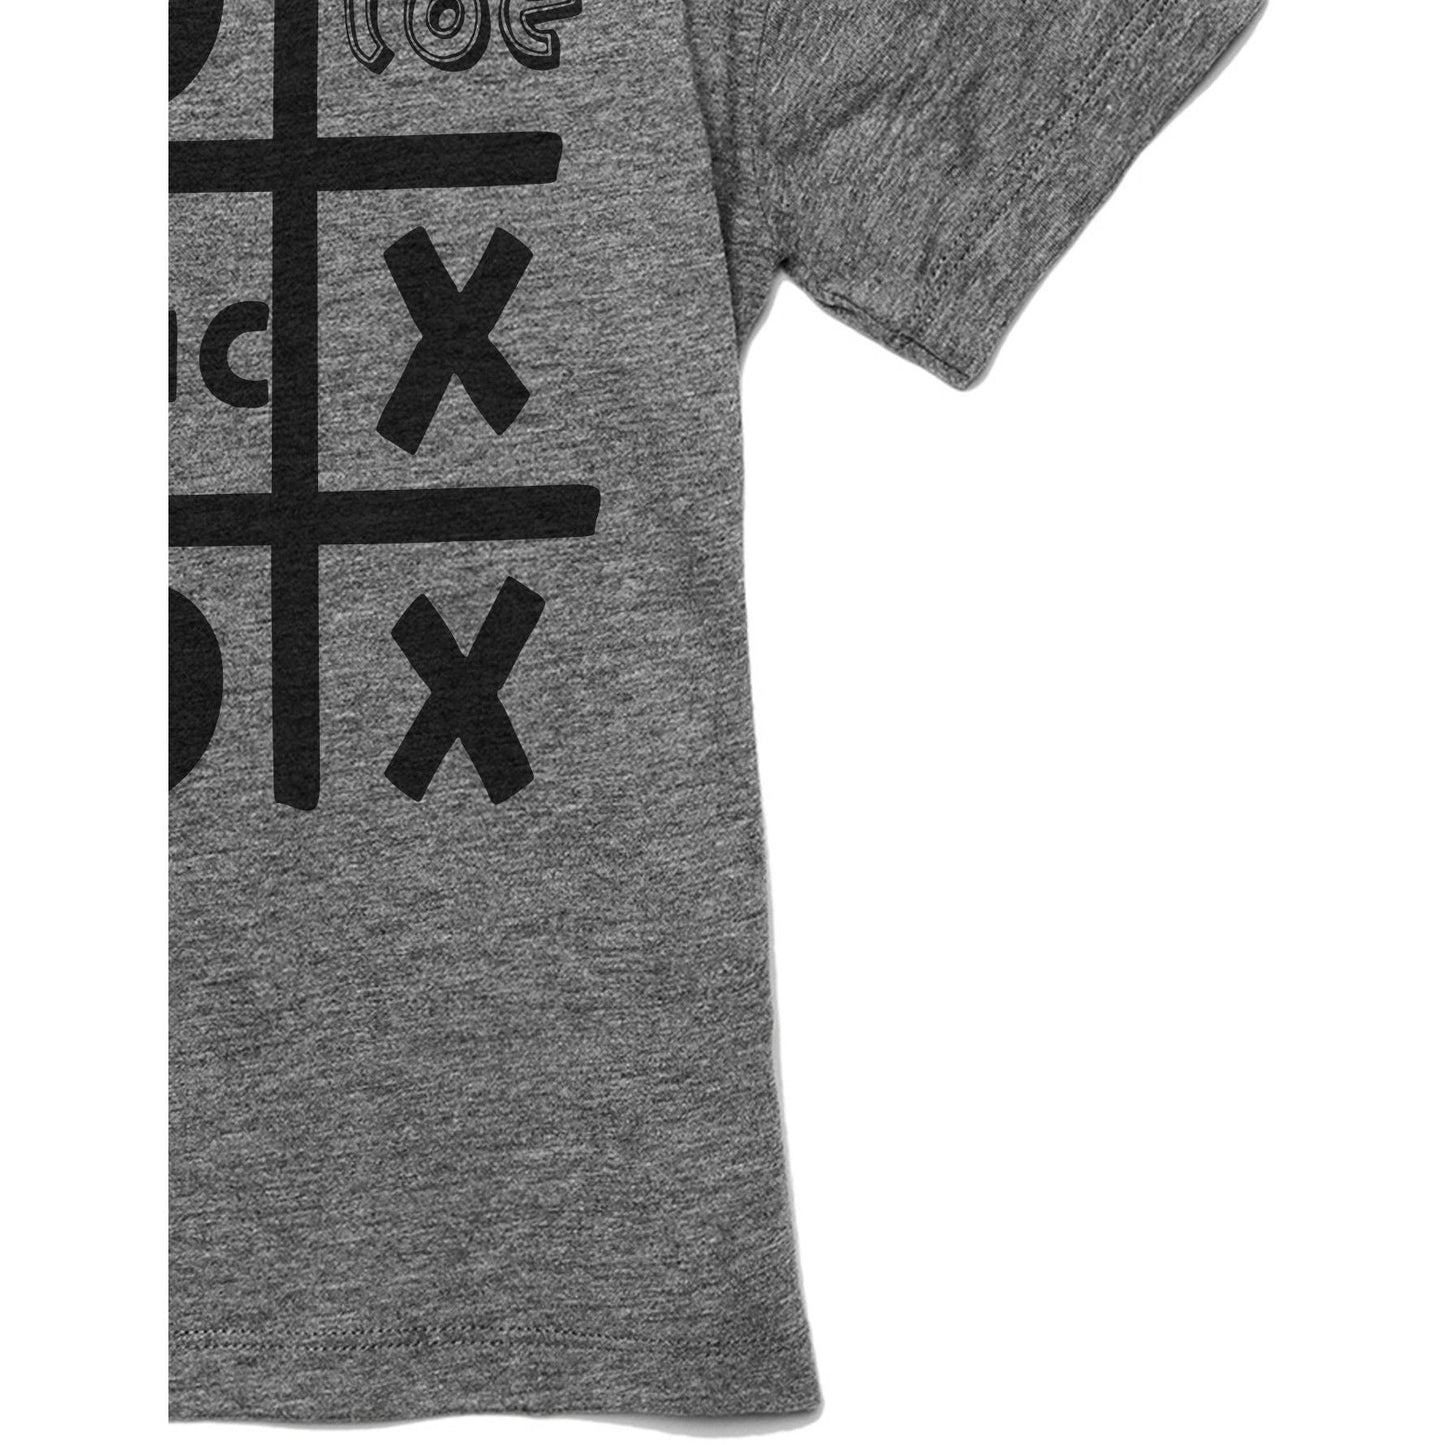 Tic Tac Toe - Stories You Can Wear